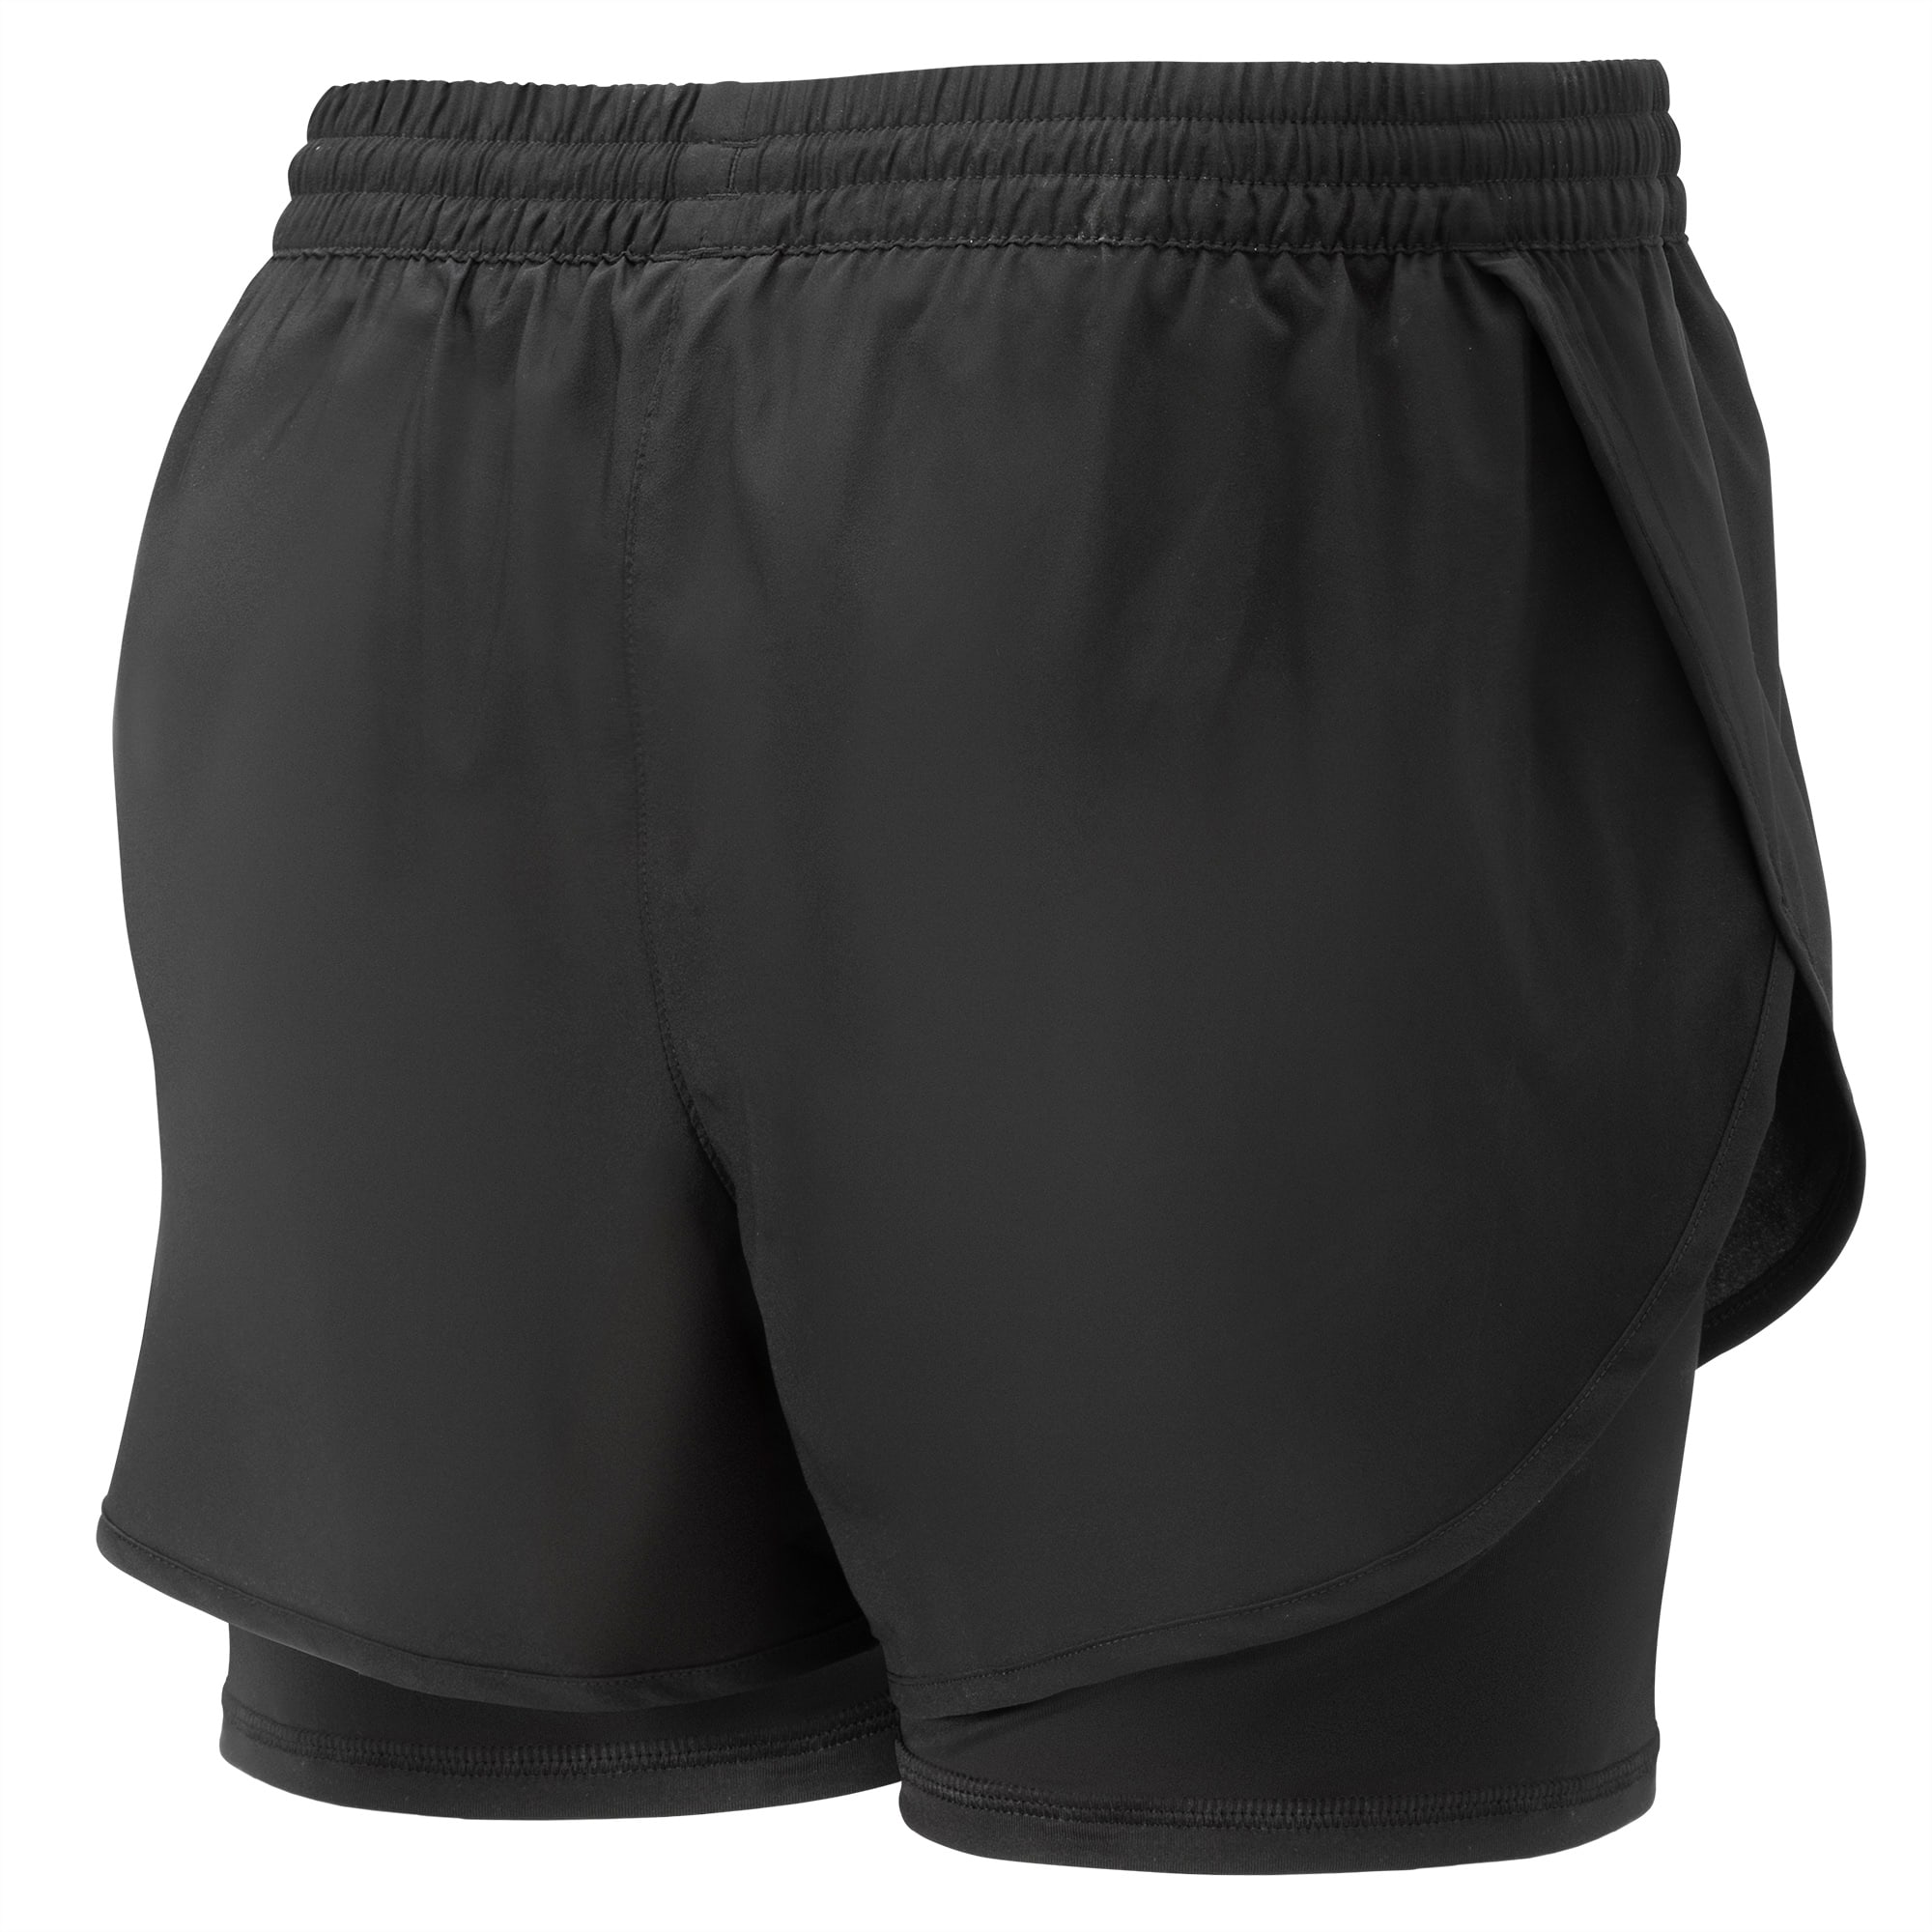 Cheetah Boys' Woven Shorts with Compression Liners, 2-Pack, Sizes